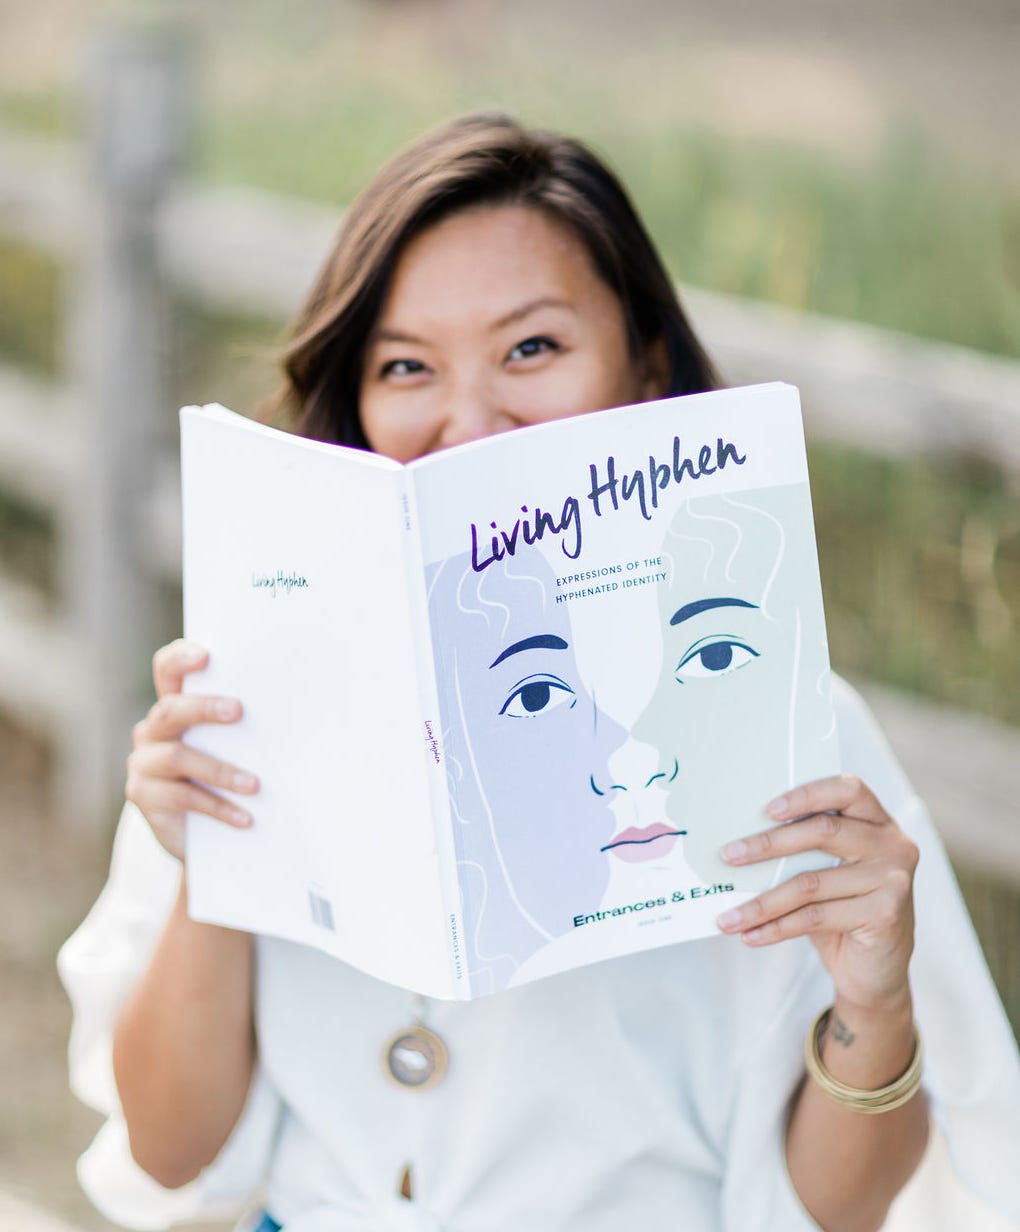 Justine holding up a Living Hyphen magazine up to cover half her face.